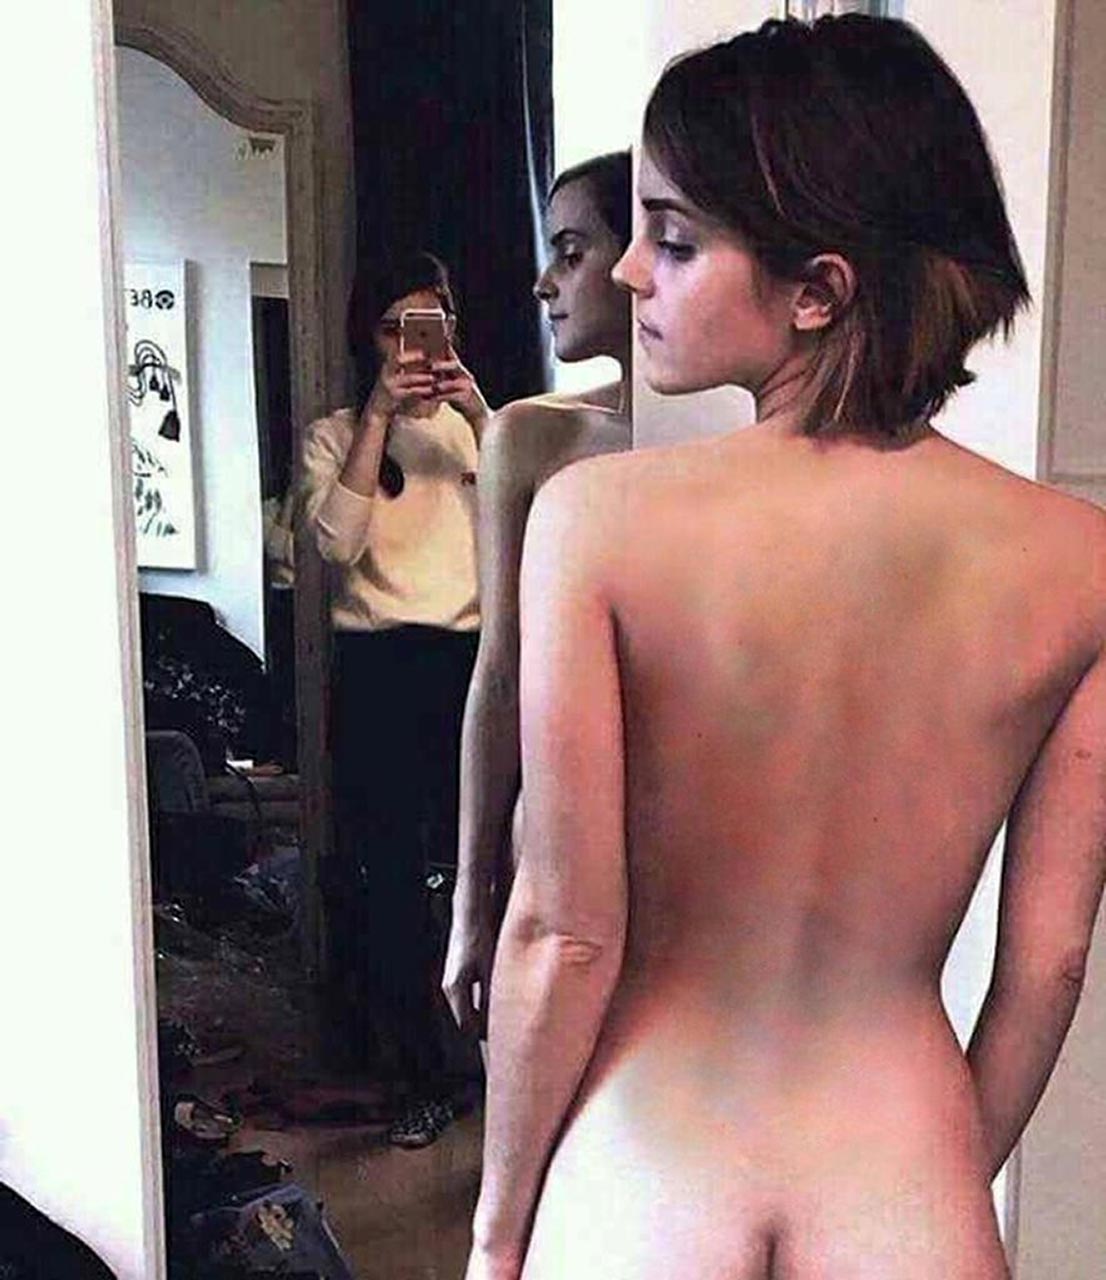 Bum! Emma Watson LEAKED Photos and Video [8 Nudes]